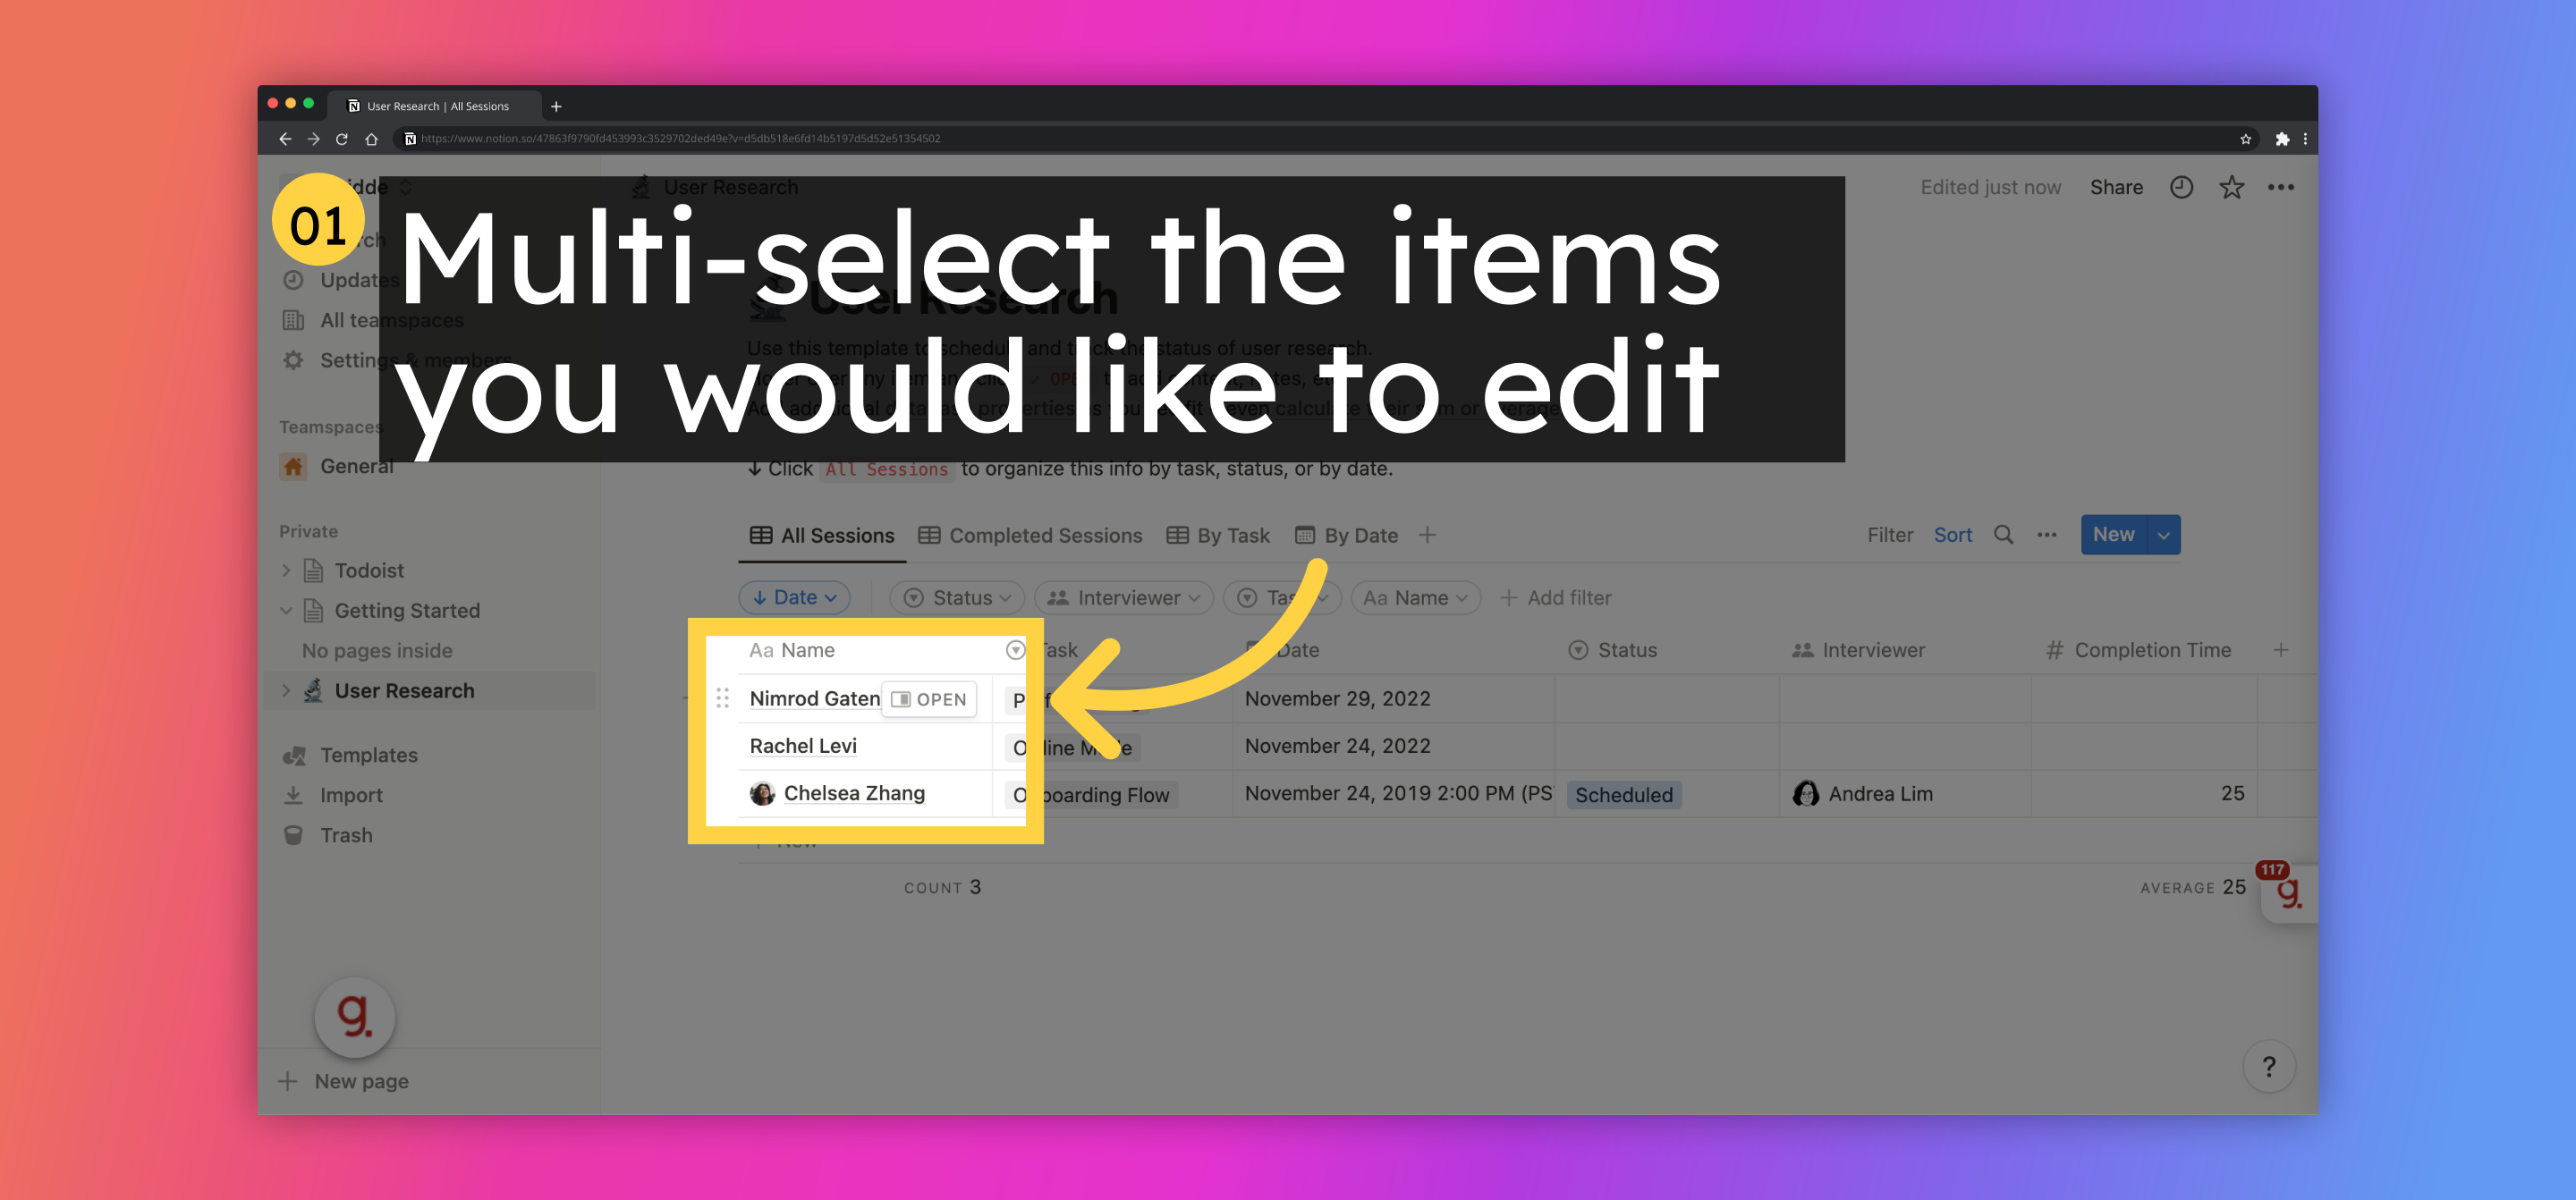 Multi-select the items you would like to edit